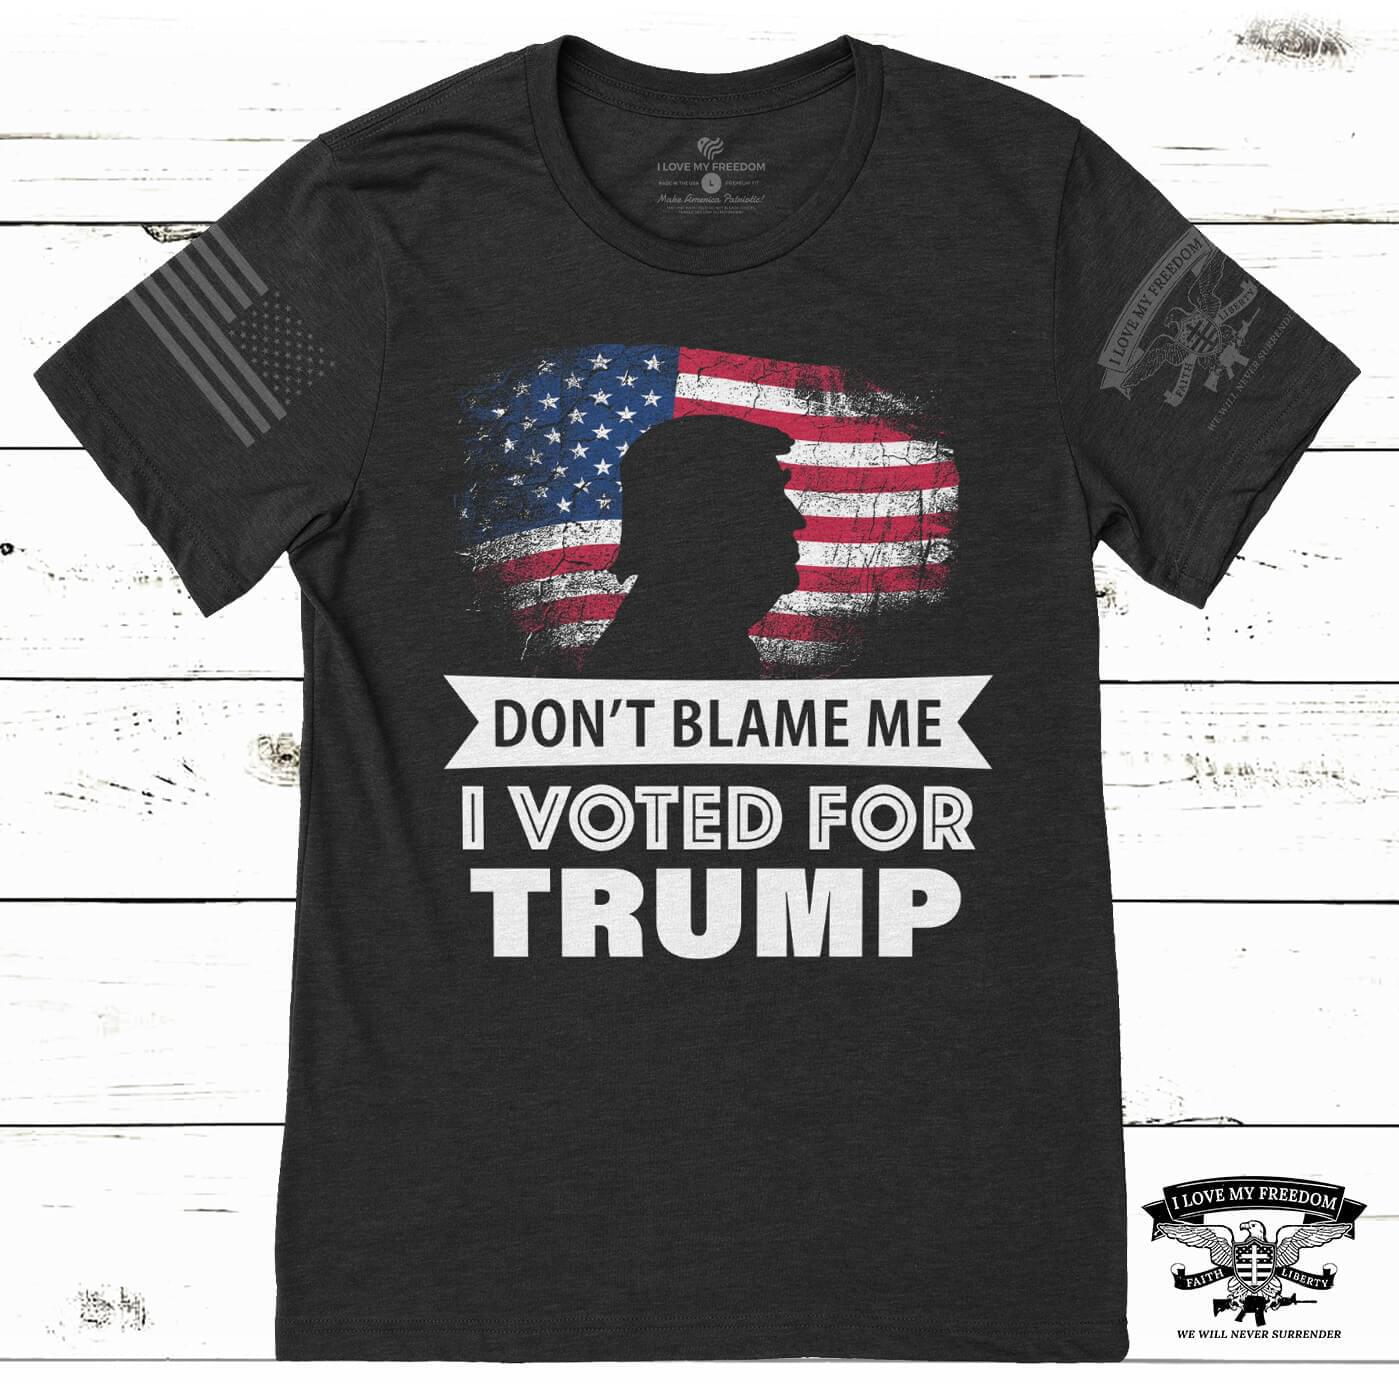 Send A Message To Liberals With Your “DON’T BLAME ME – I
VOTED FOR TRUMP” T-Shirt 1